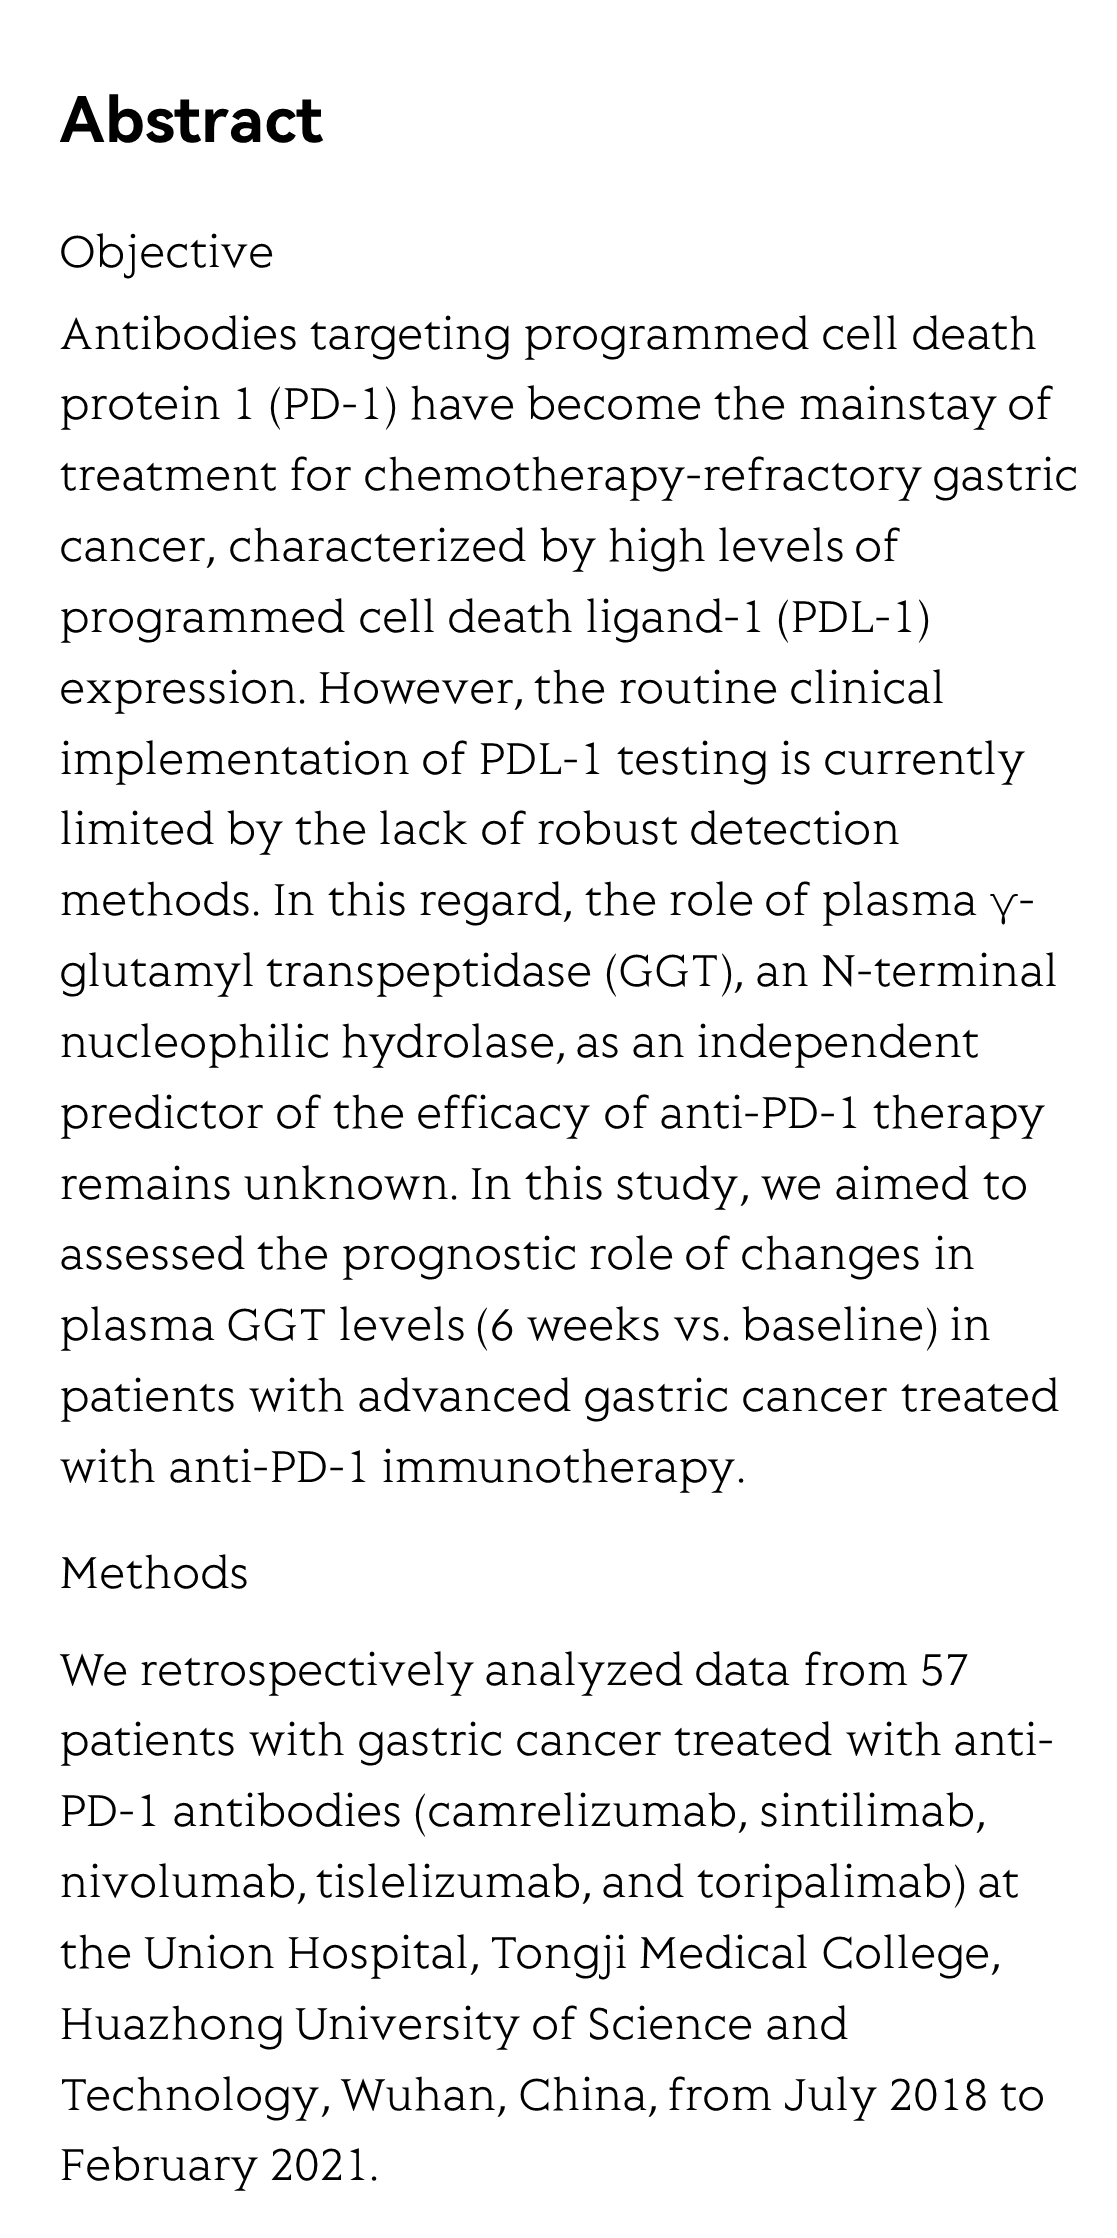 Prognostic role of plasma levels of γ-glutamyl transpeptidase in patients with advanced gastric cancer treated with anti-PD-1 immunotherapy_2